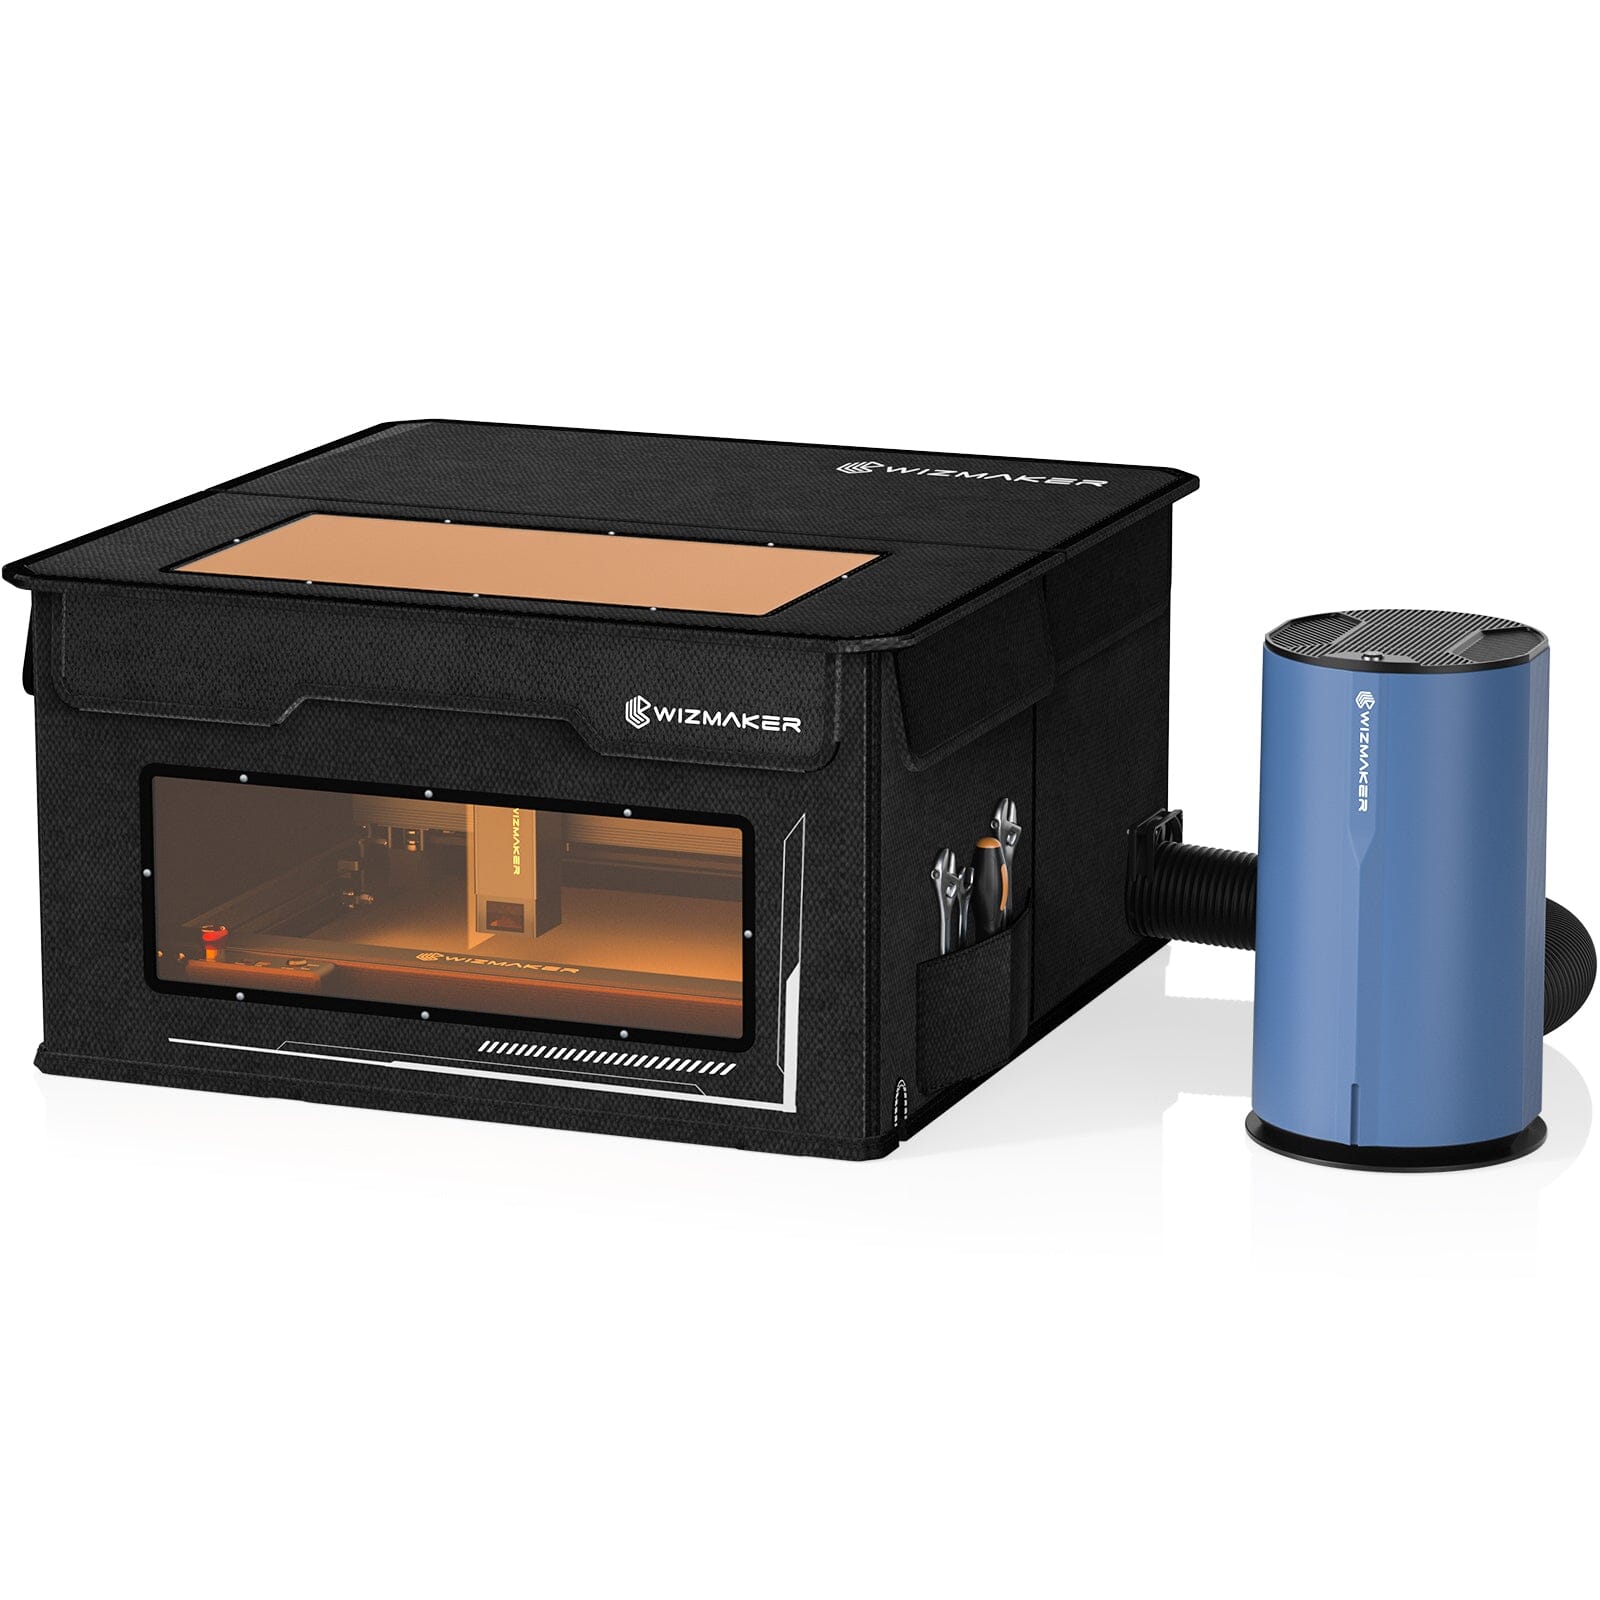 Wizmaker Enclosure and Air Purifier for laser engravers review - the  powerful exhaust fan and air purifier protect you from smoke and fumes -  The Gadgeteer